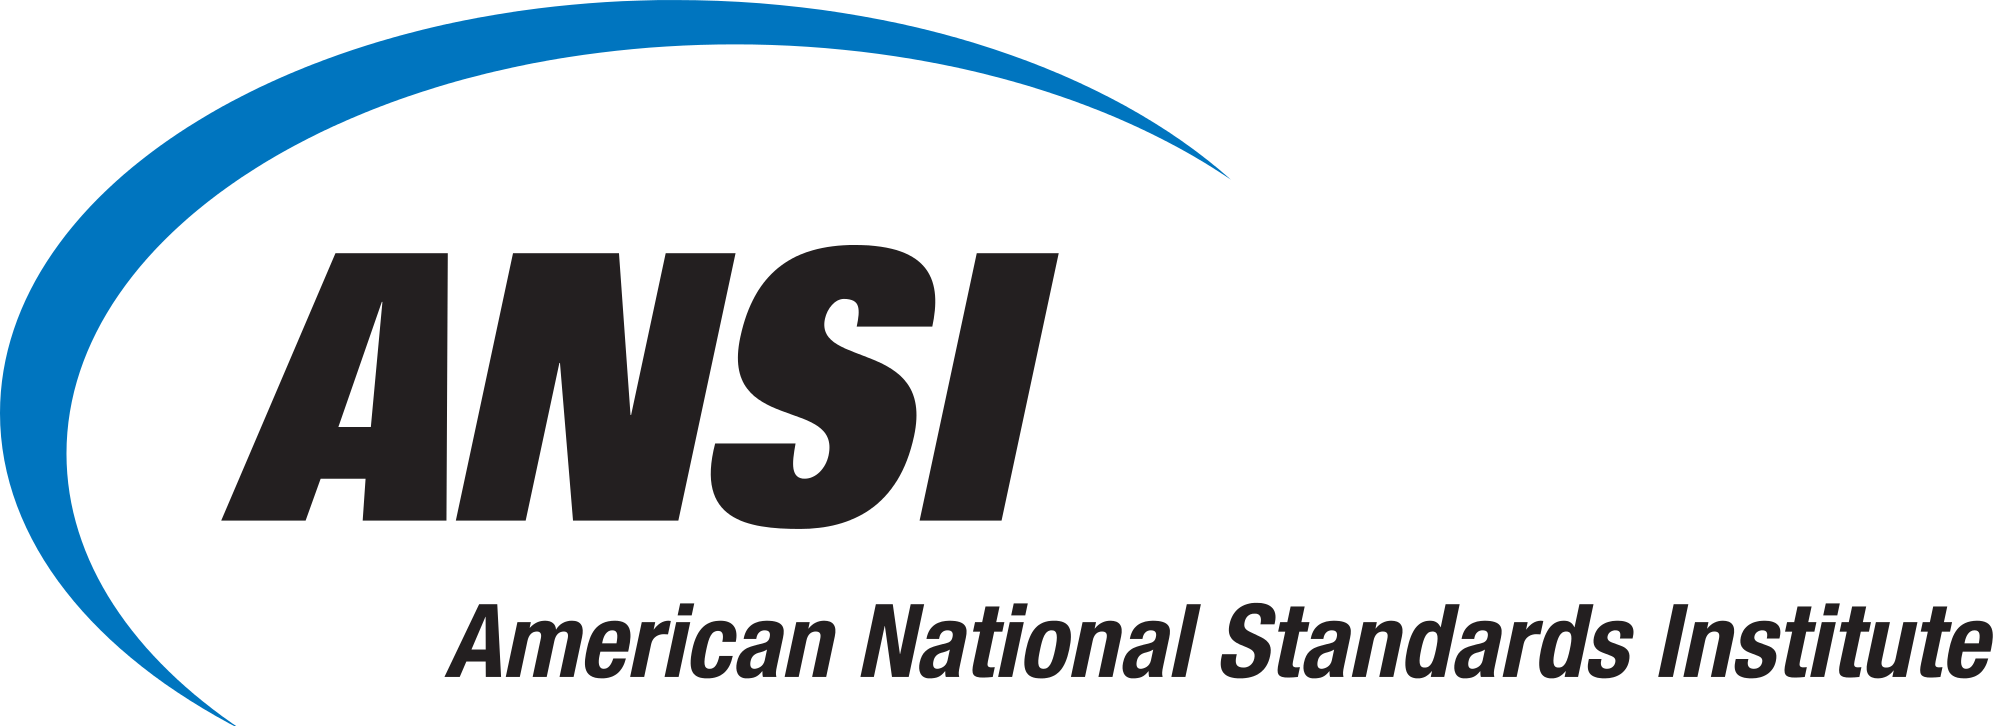 GME Supply is a proud member of the ANSI (the American National Standards Institute) Z359 committee